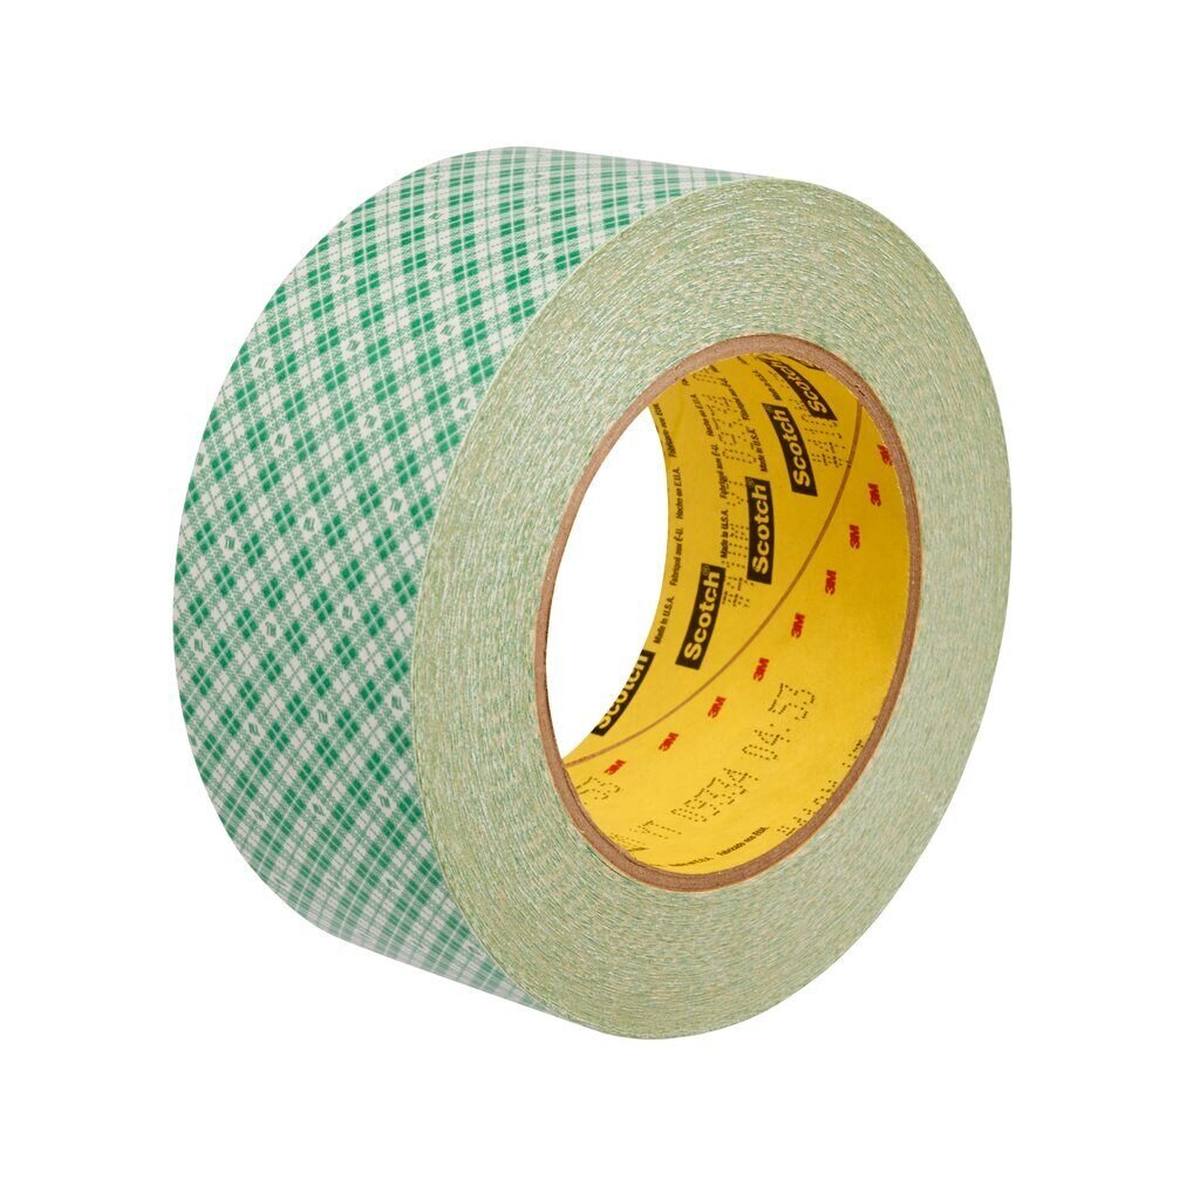 3M Double-sided adhesive tape with non-woven paper backing 410M, white, 305 mm x 33 m, 0.13 mm